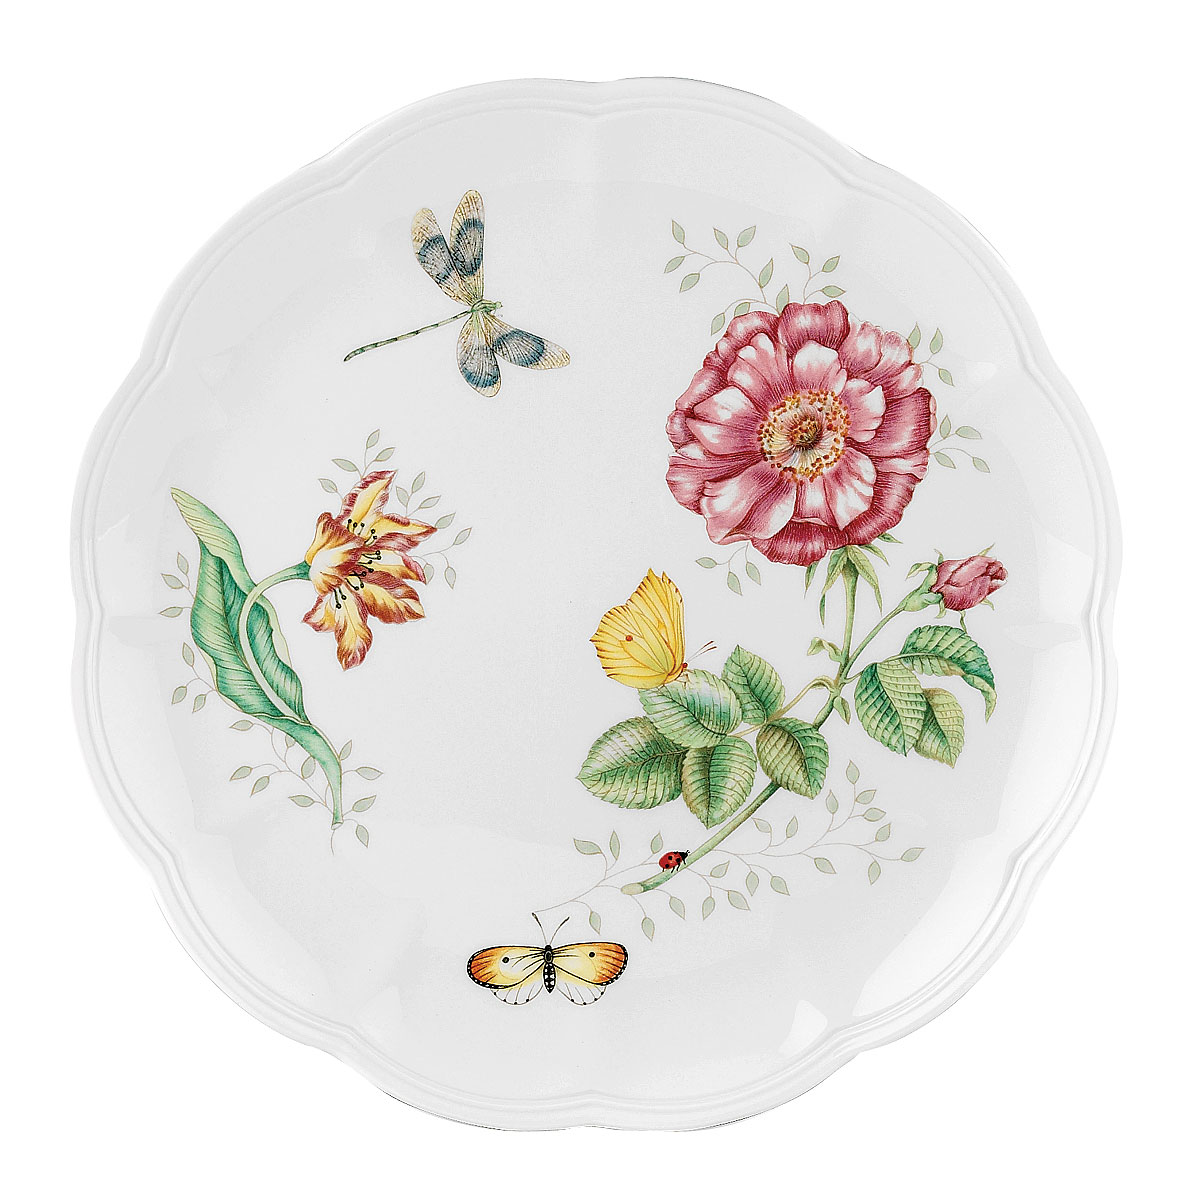 Lenox Butterfly Meadow China Dragonfly Dinner Plate, Single